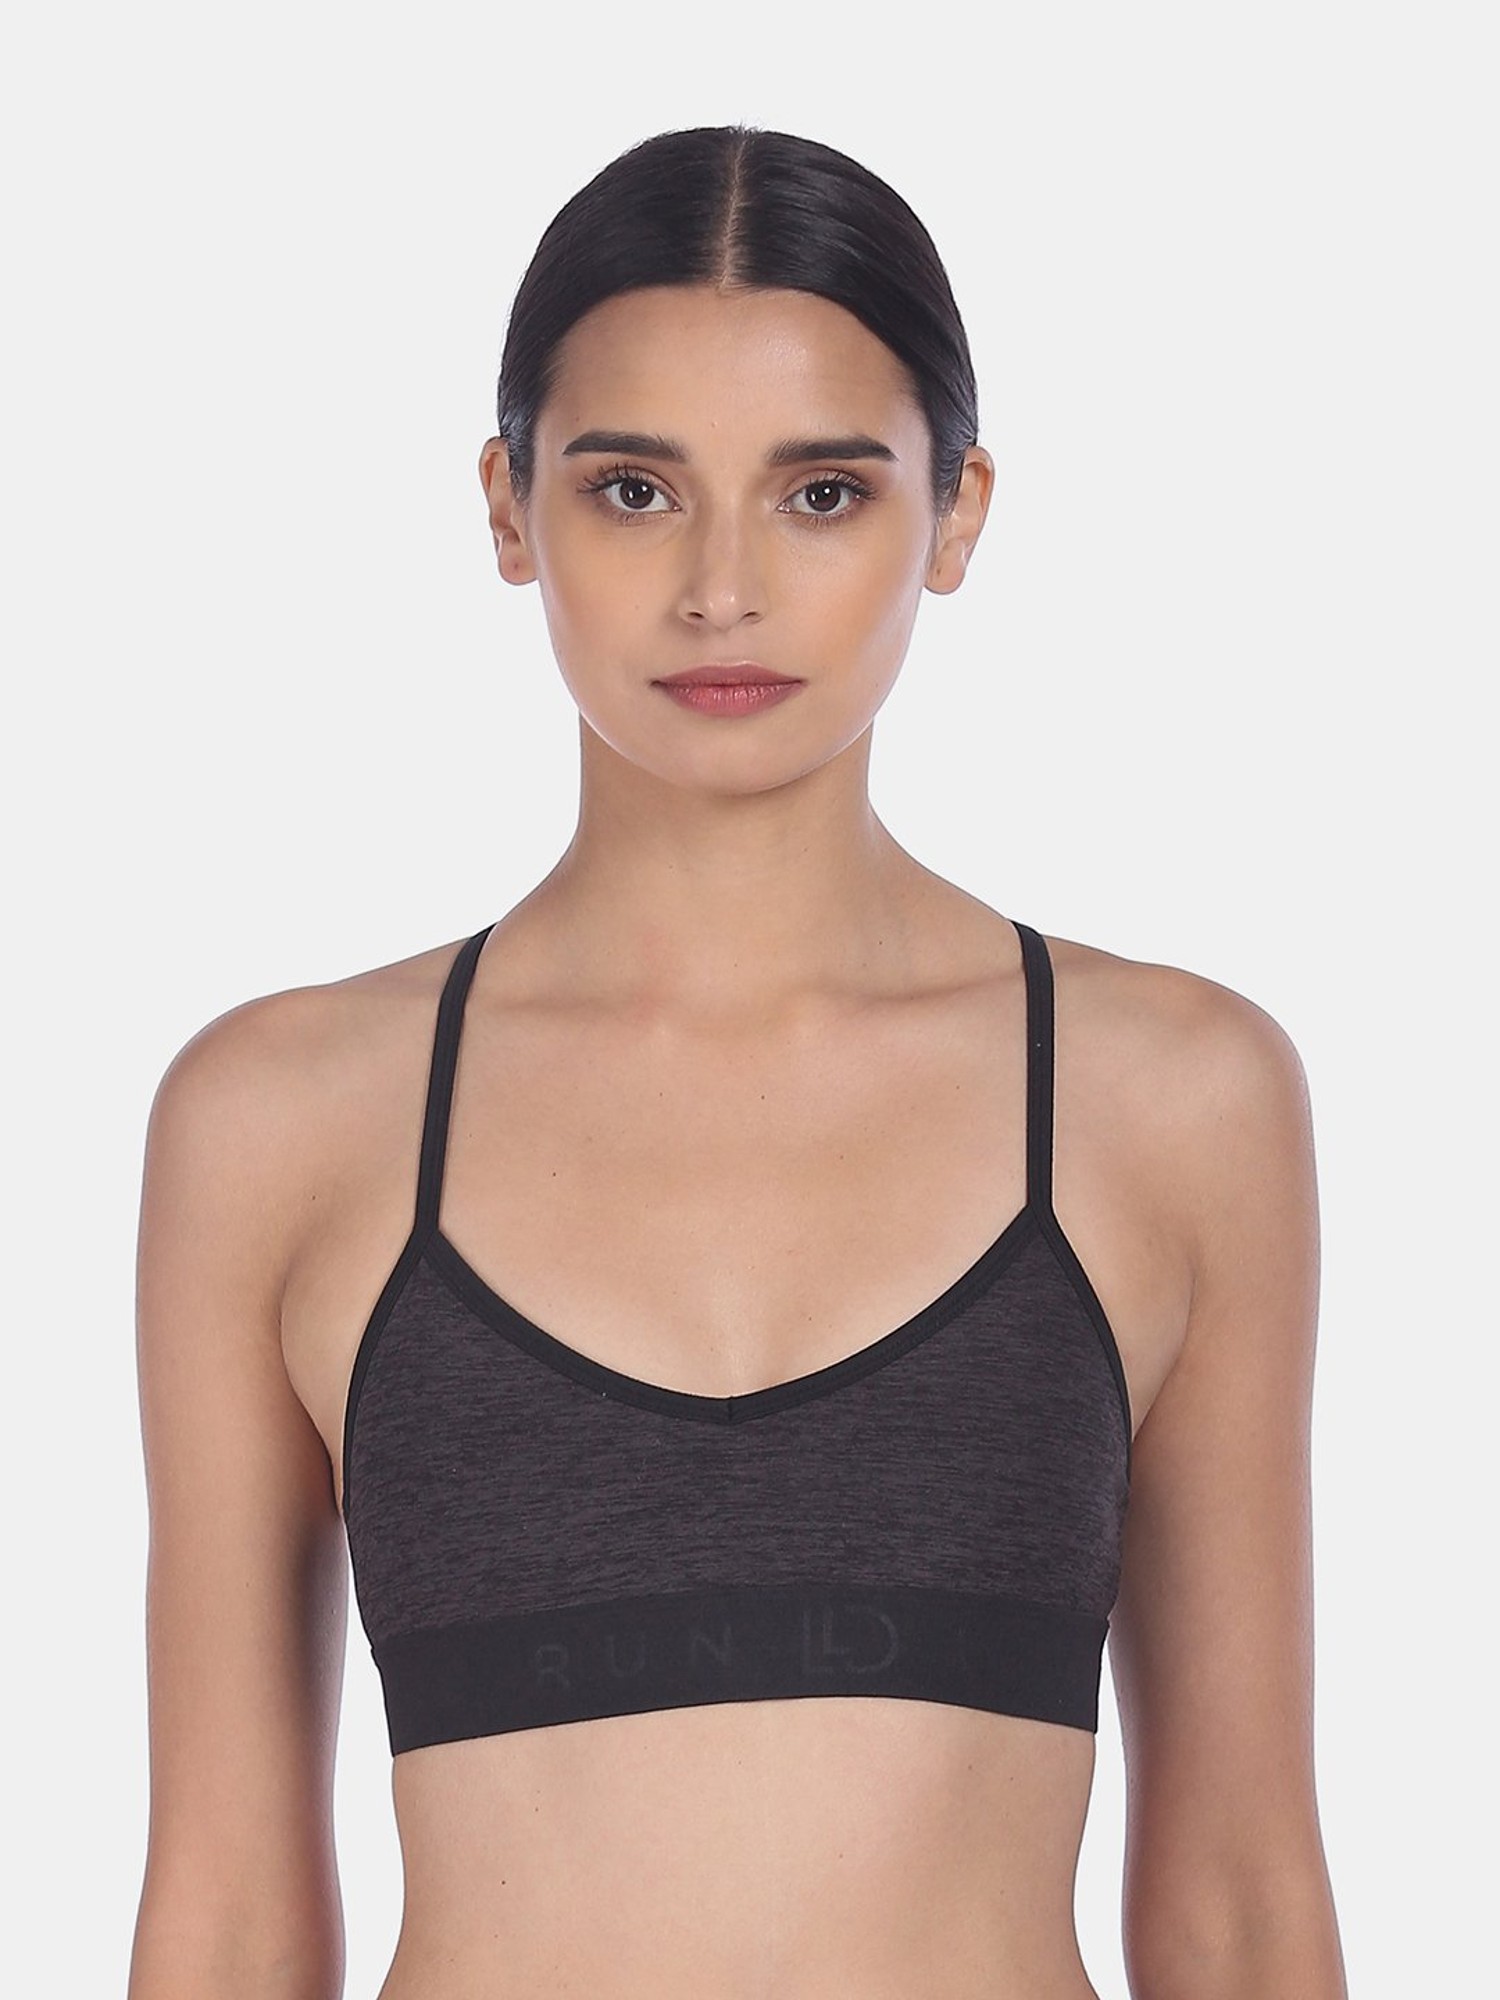 Buy Aeropostale Charcoal Non-Wired Non-Padded Sports Bra for